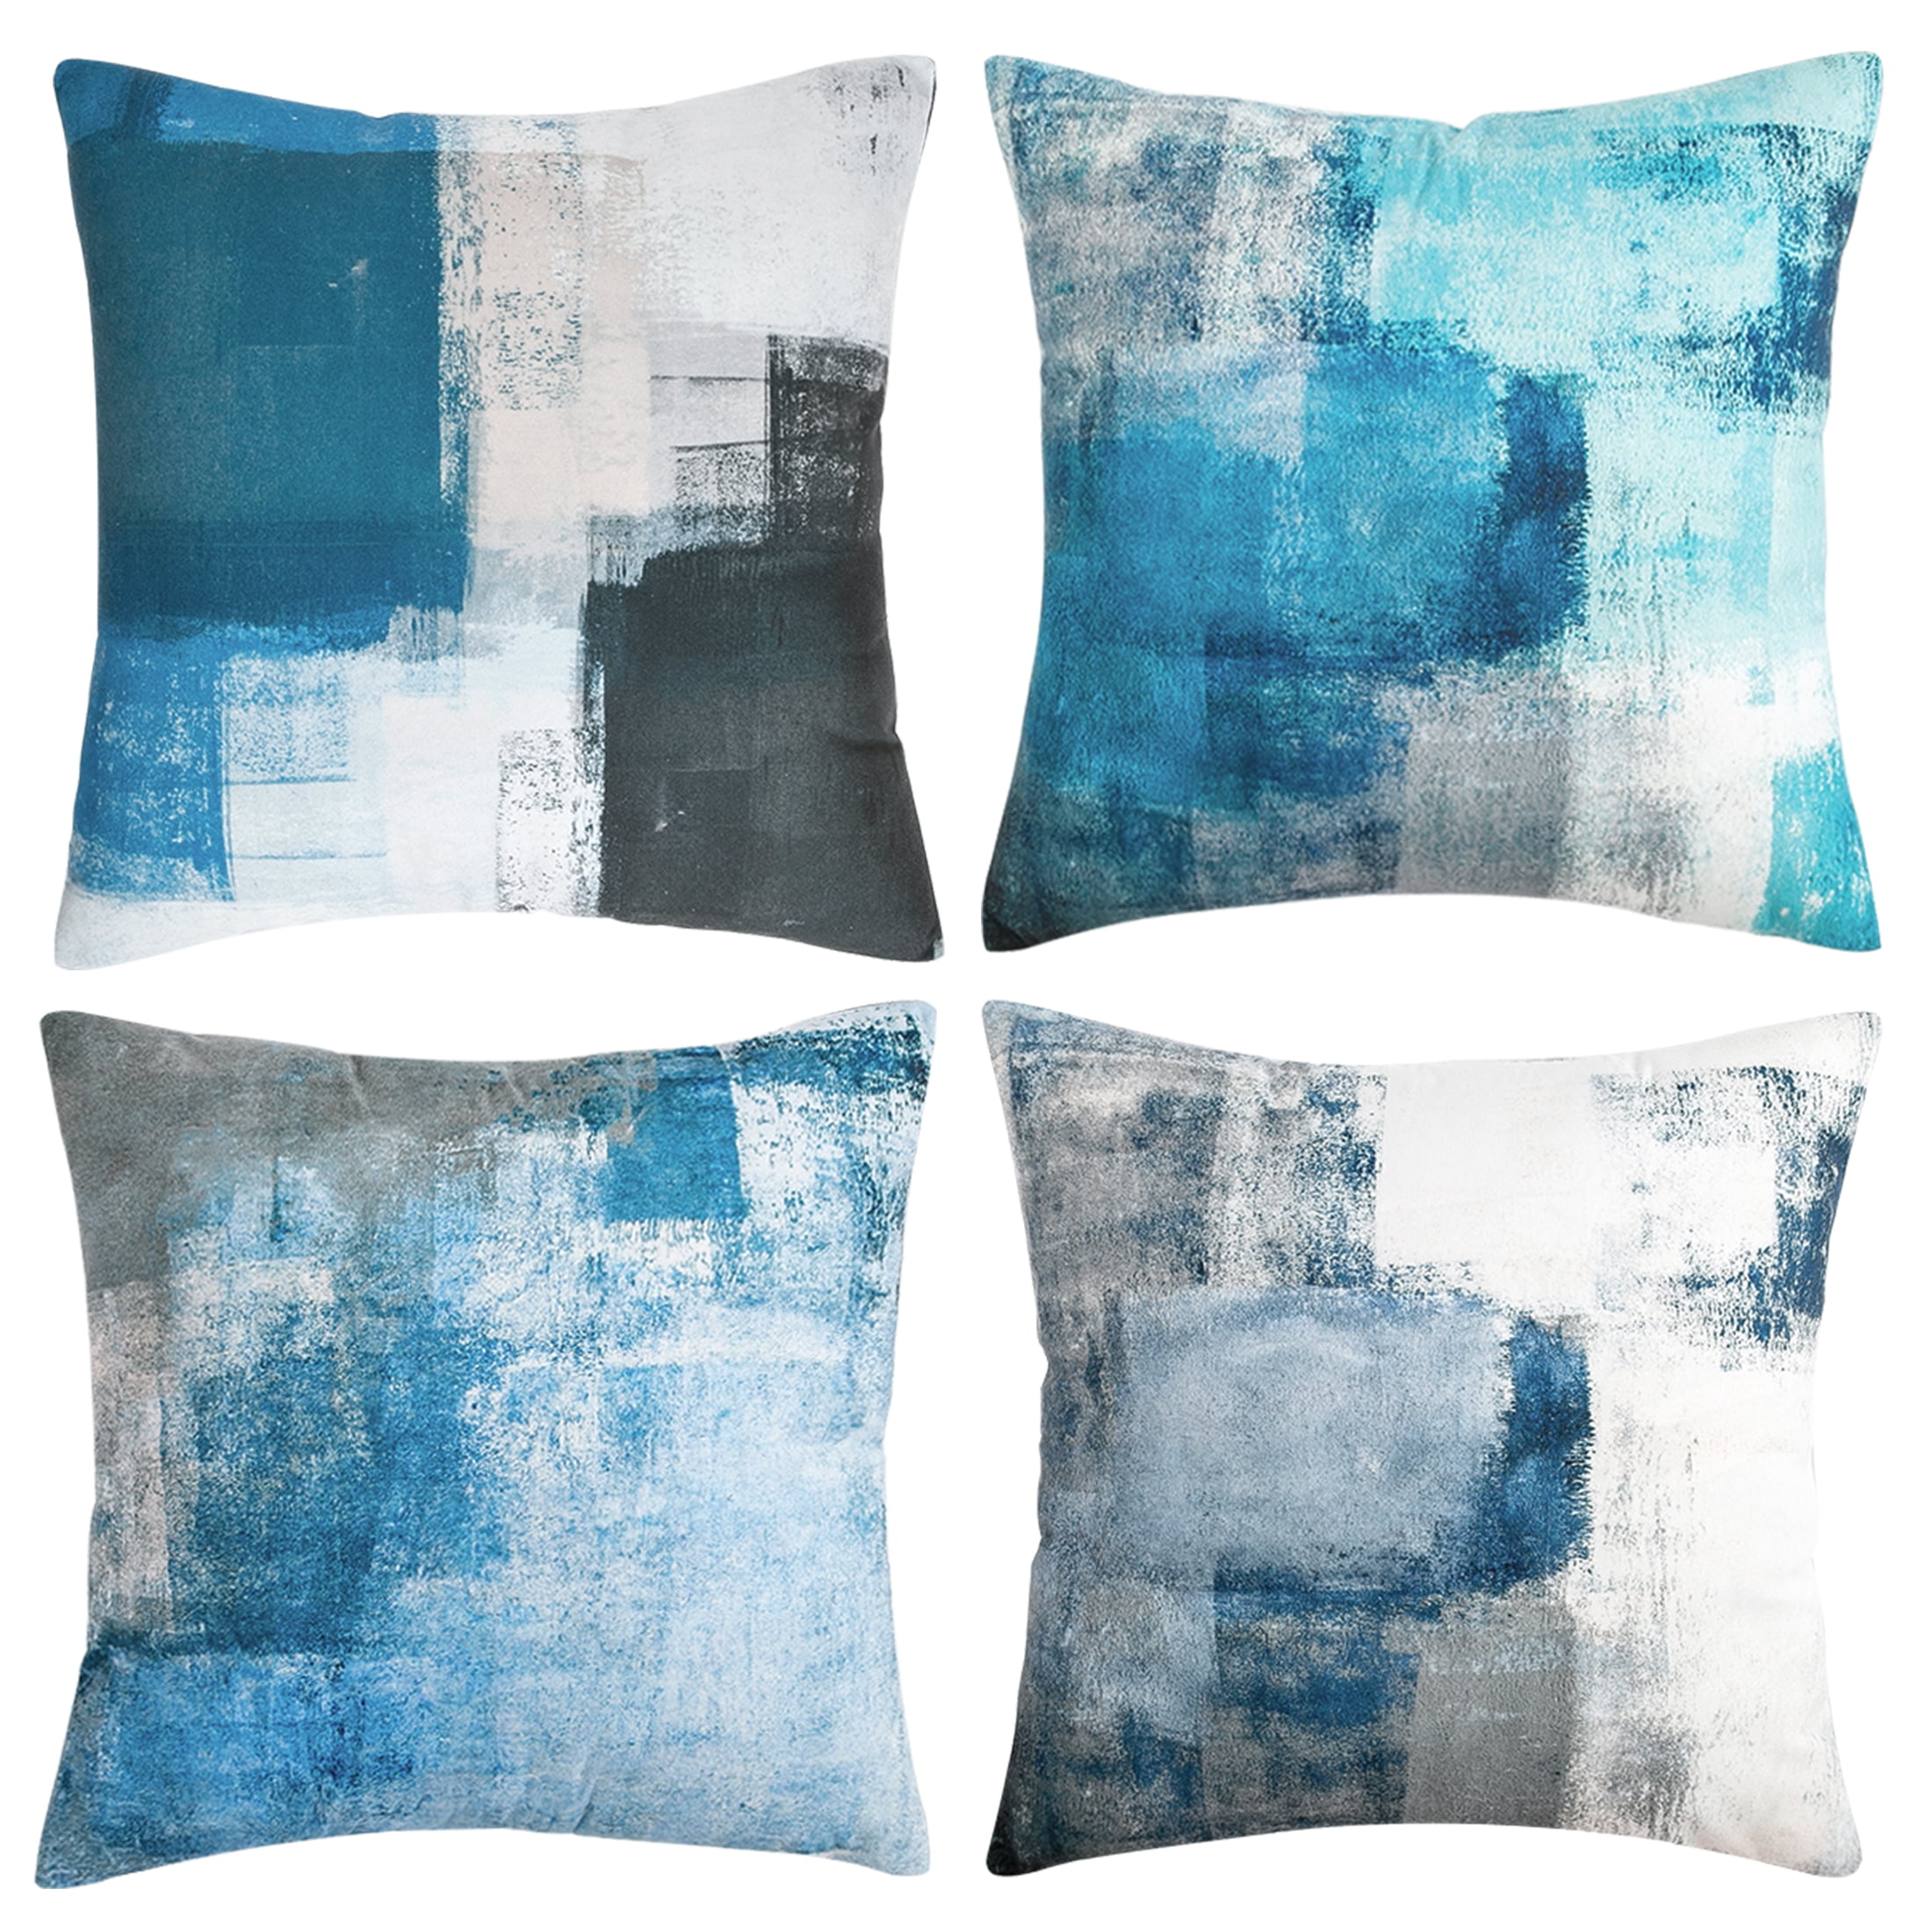 Small or Large Teal Throw Pillow for Bed Decor, Big Couch Pillows